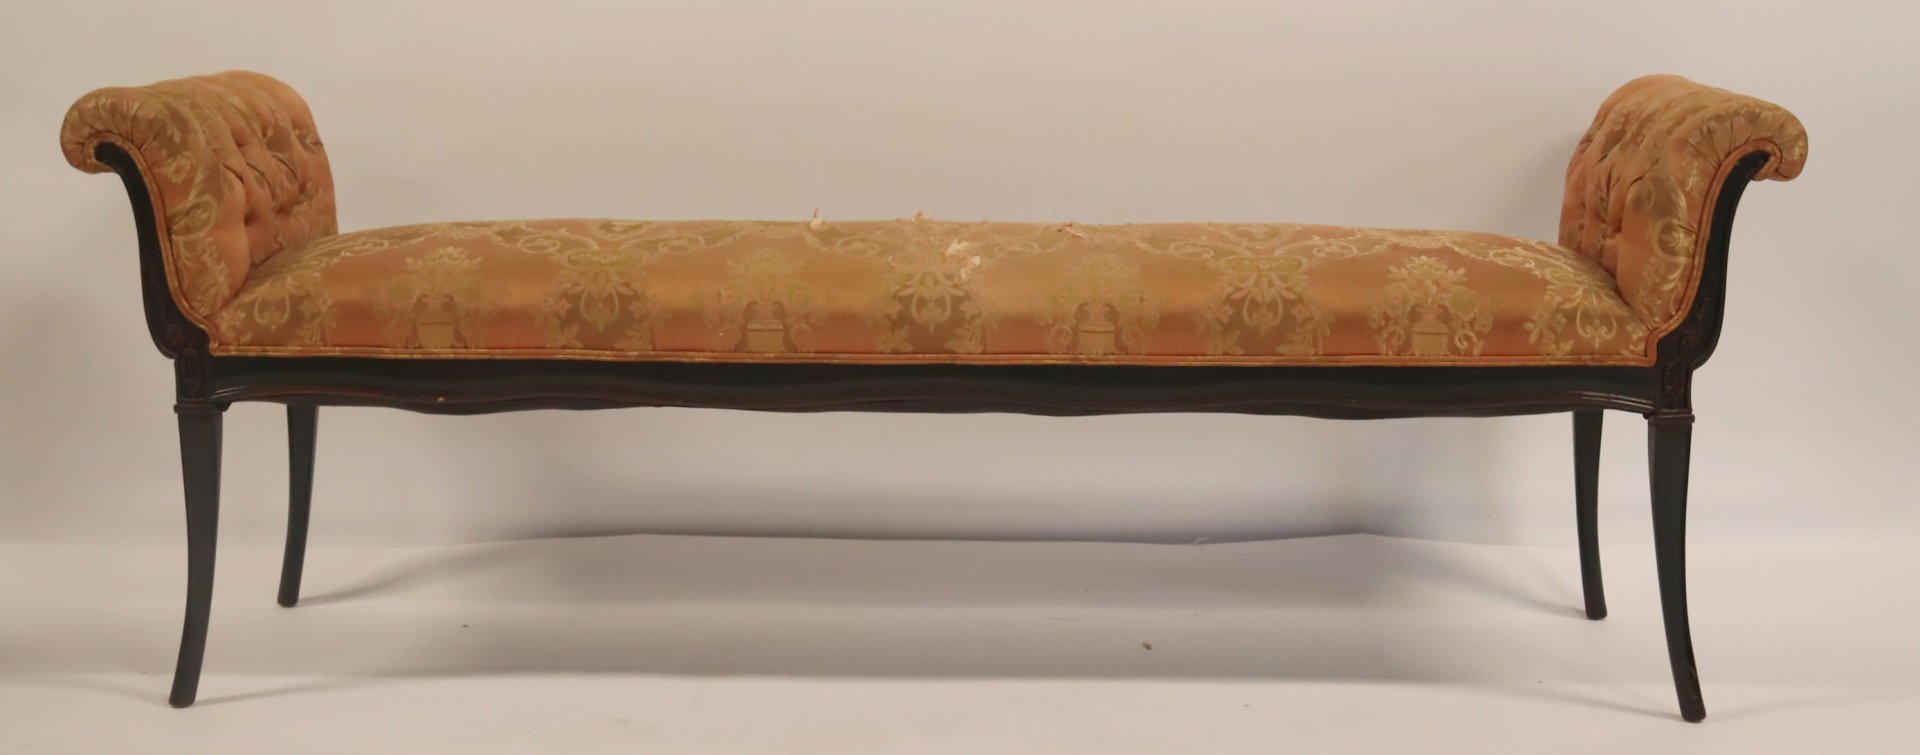 ANTIQUE UPHOLSTERED SCROLL ARM